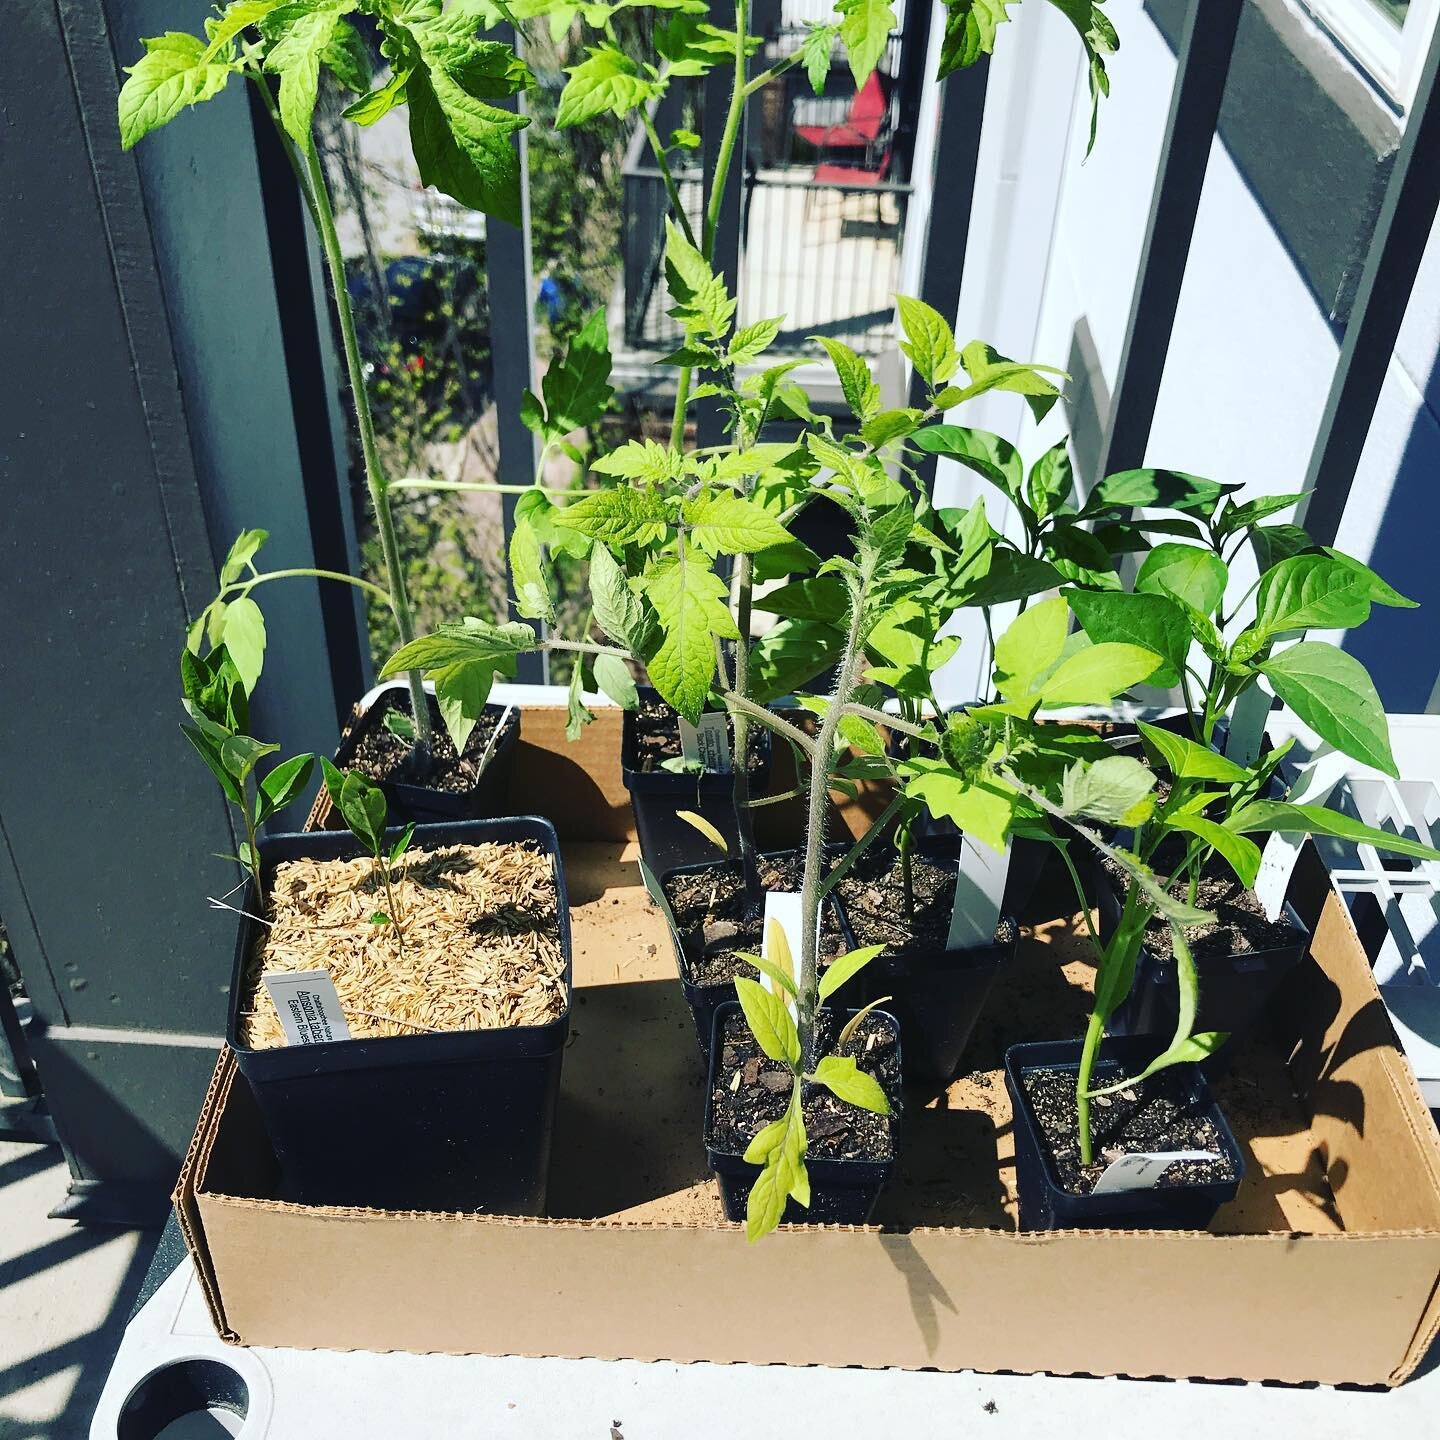 So thankful for @chattahoocheenaturecenter for their online sale so I could still have my spring garden. I can&rsquo;t wait for these peppers and tomatoes! 🍅🌶A little green to brighten my day. Love supporting a local business 🌱
.
.
#iteachspeciale